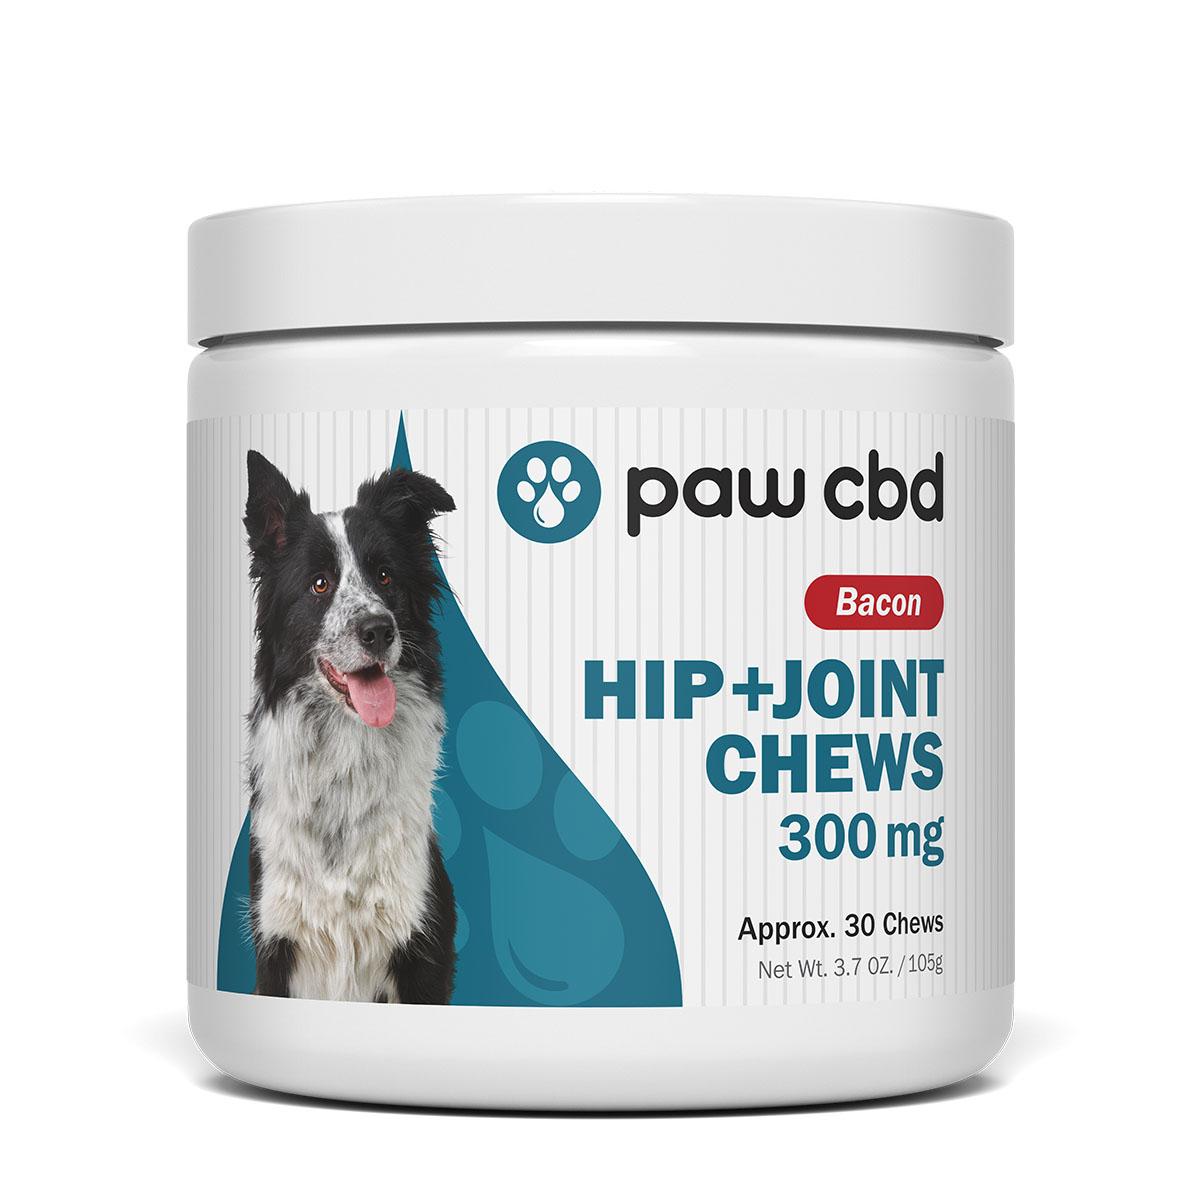 cbdMD Paw CBD Hip & Joint Soft Chews for Medium Dogs - Bacon - 300 mg, 30 Count